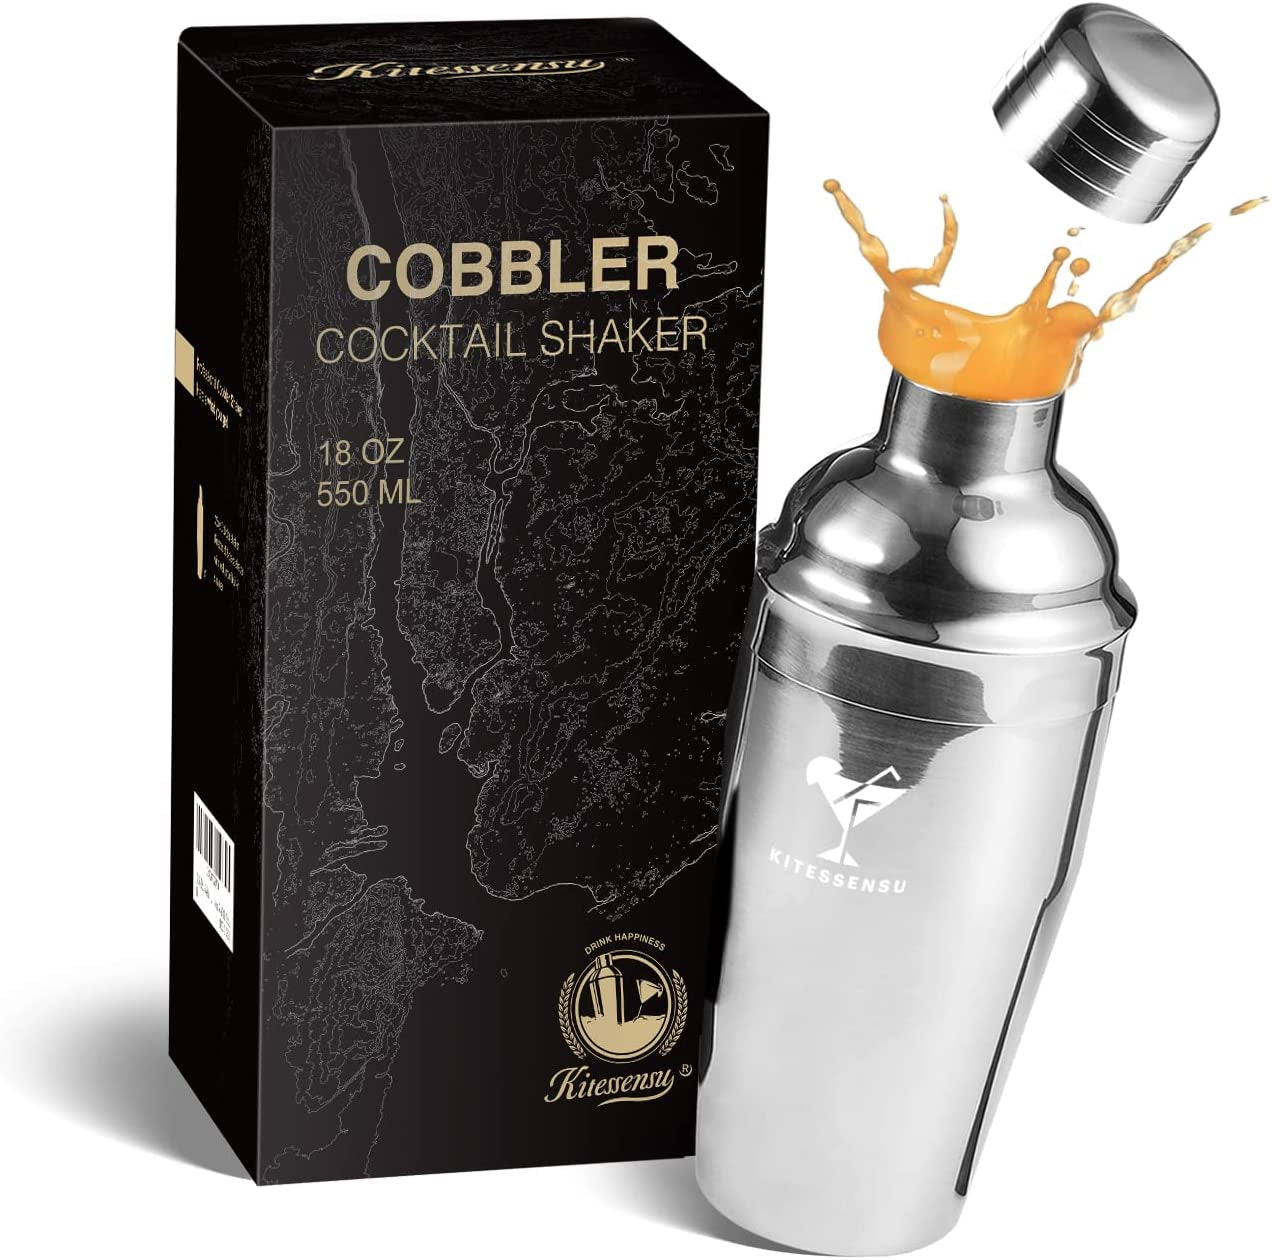 Cocktail Shaker, 19oz Martini Shaker with Strainer, Premium 18/8 Stainless Steel Cobbler Drink Shaker, FREE Recipes Booklet Included